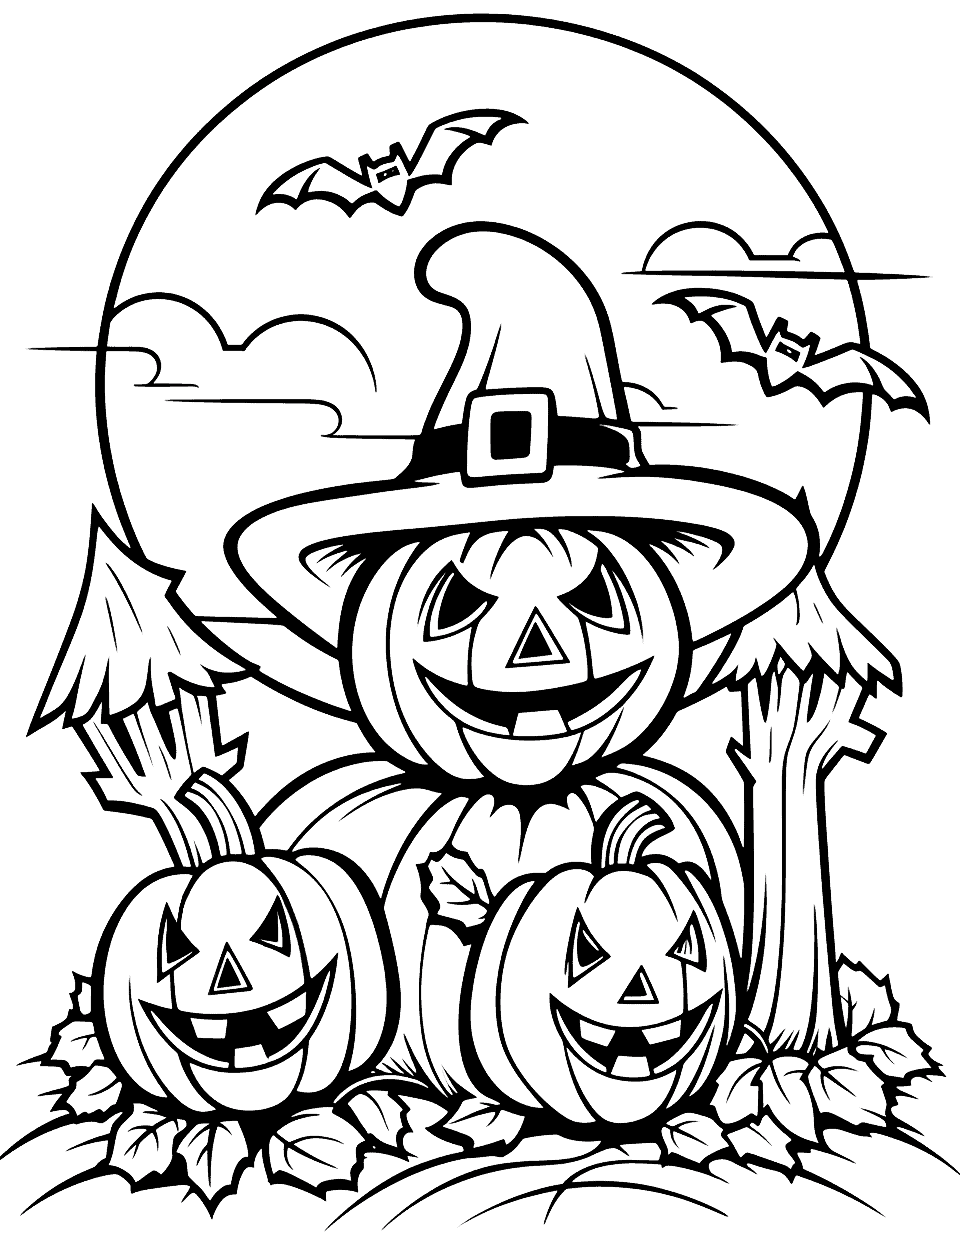 Easy Halloween Scene Coloring Page - An uncomplicated coloring page featuring a basic Halloween scene – pumpkins, bats, and a full moon.